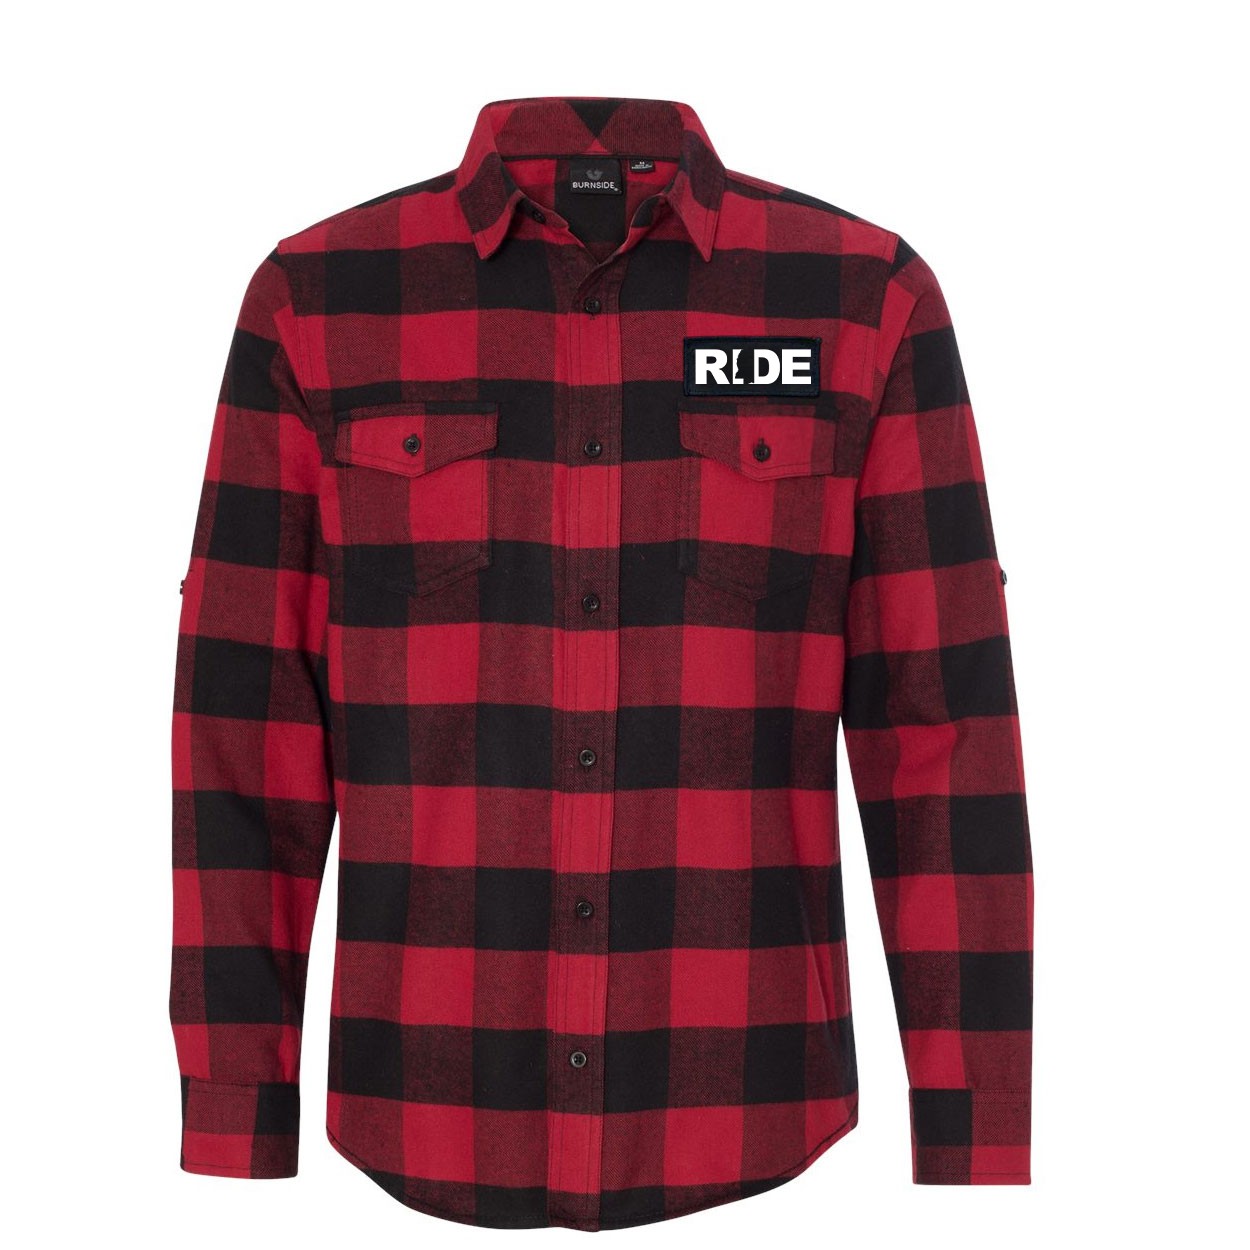 Ride Mississippi Classic Unisex Long Sleeve Woven Patch Flannel Shirt Red/Black Buffalo (White Logo)